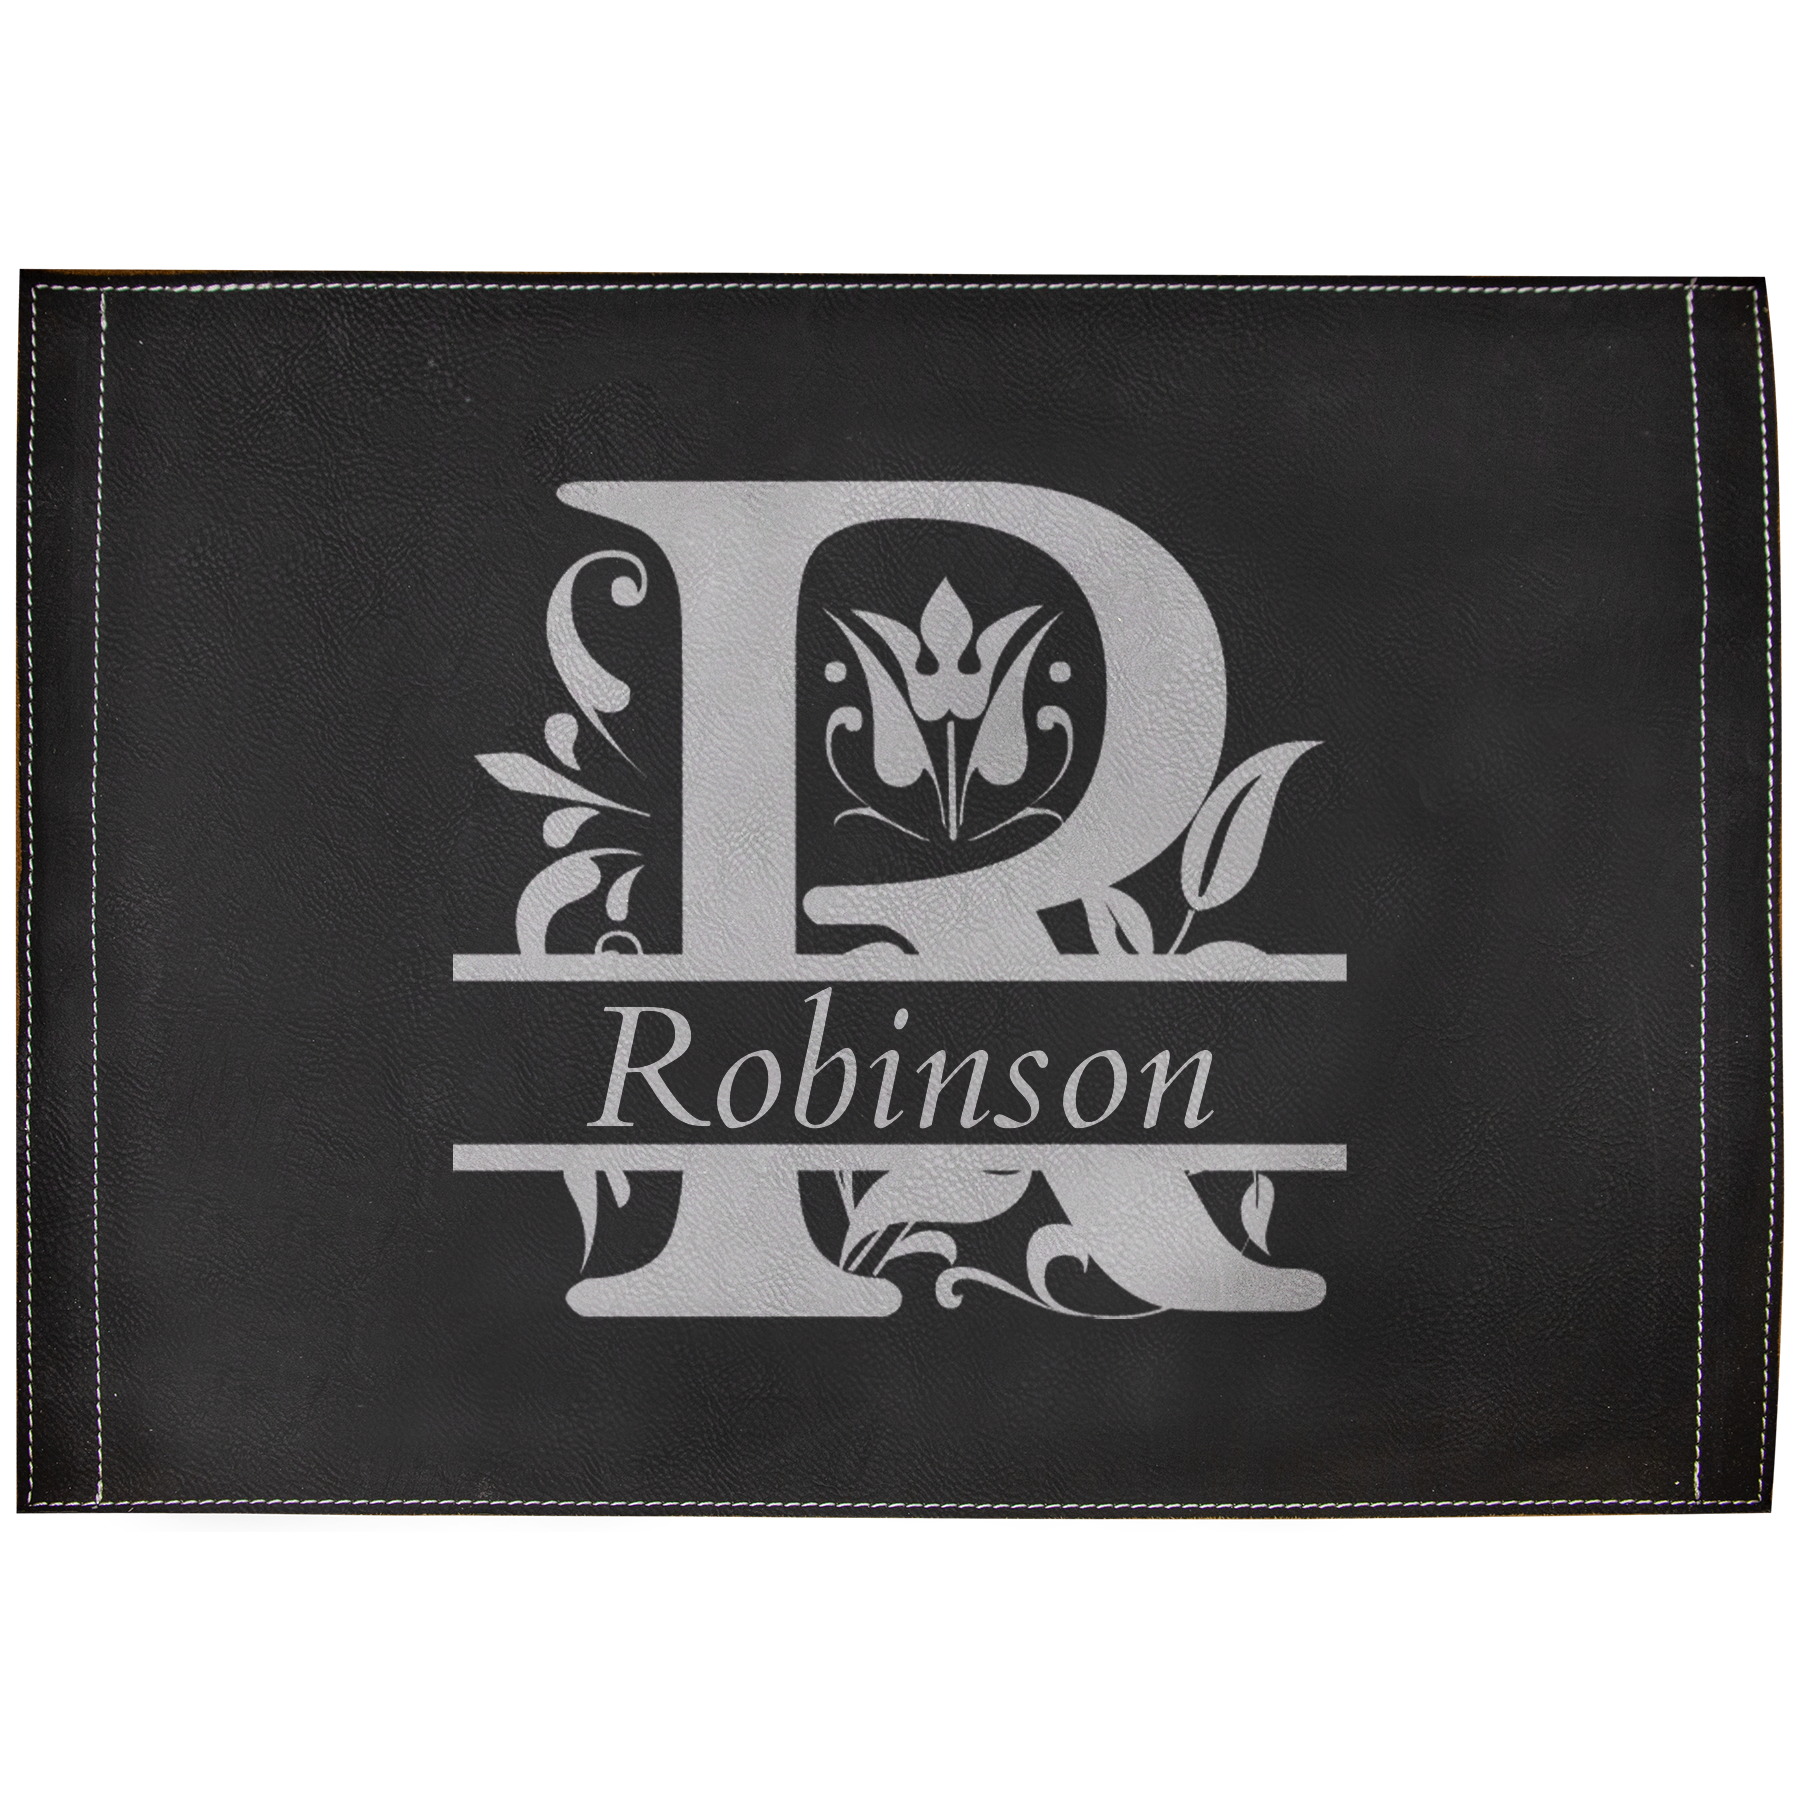 Serving Tray Insert Replacement, 16" x 12" Laserable Leatherette, Laser Engraved - Craftworks NW, LLC